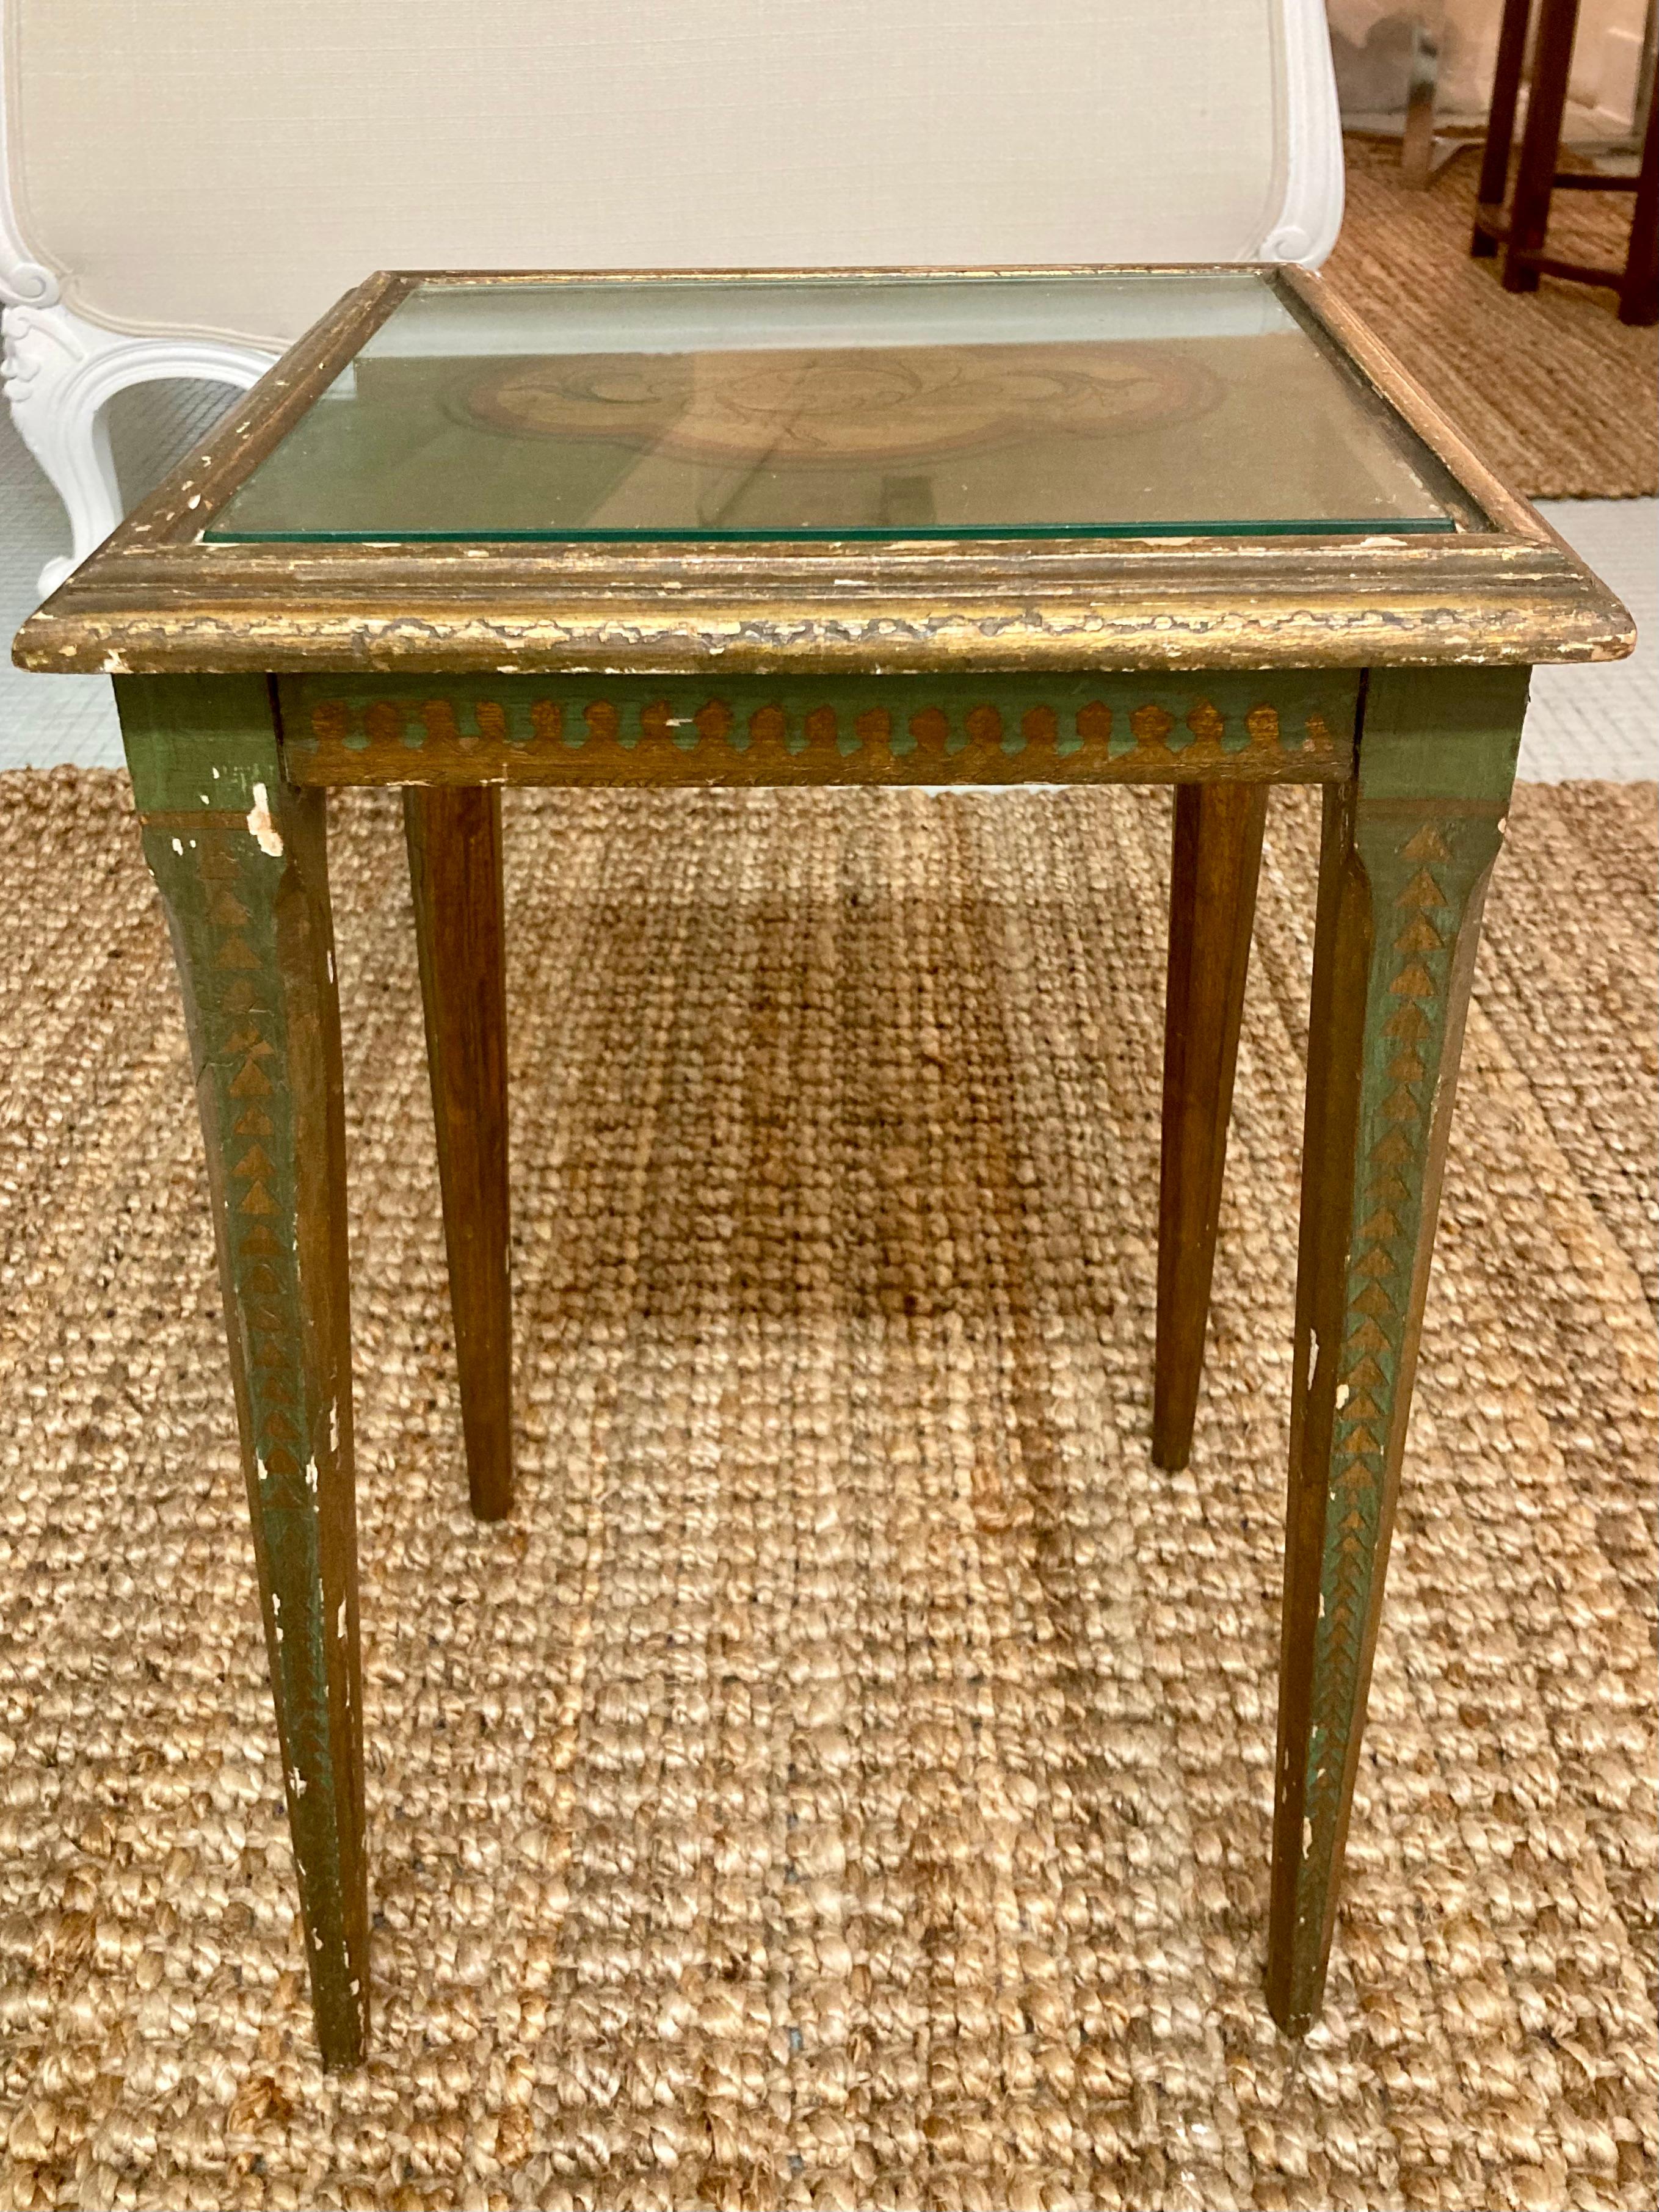 Beautiful 18th Century Venetian cocktail table. Hand painted on most surfaces in greens and gold. Add some classic Italian style to your home.